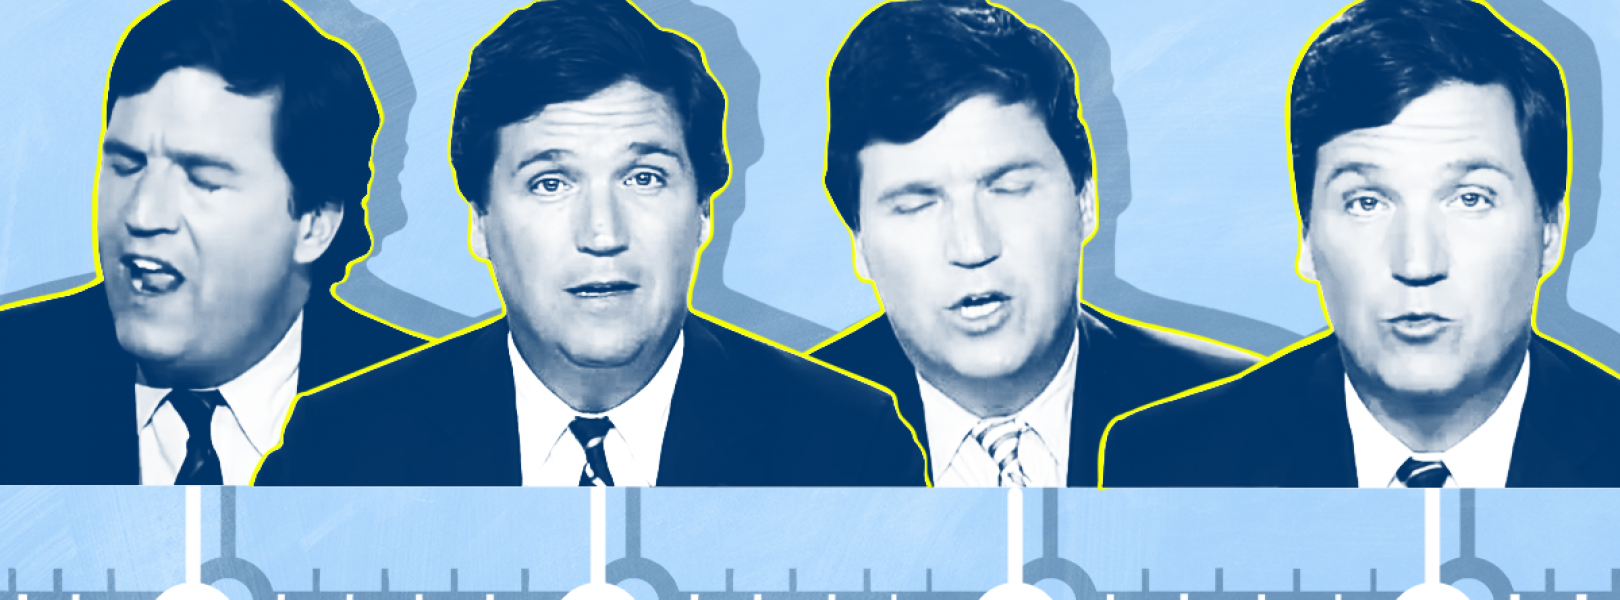 Timeline-Tucker-Carlson-white-supremacy.png